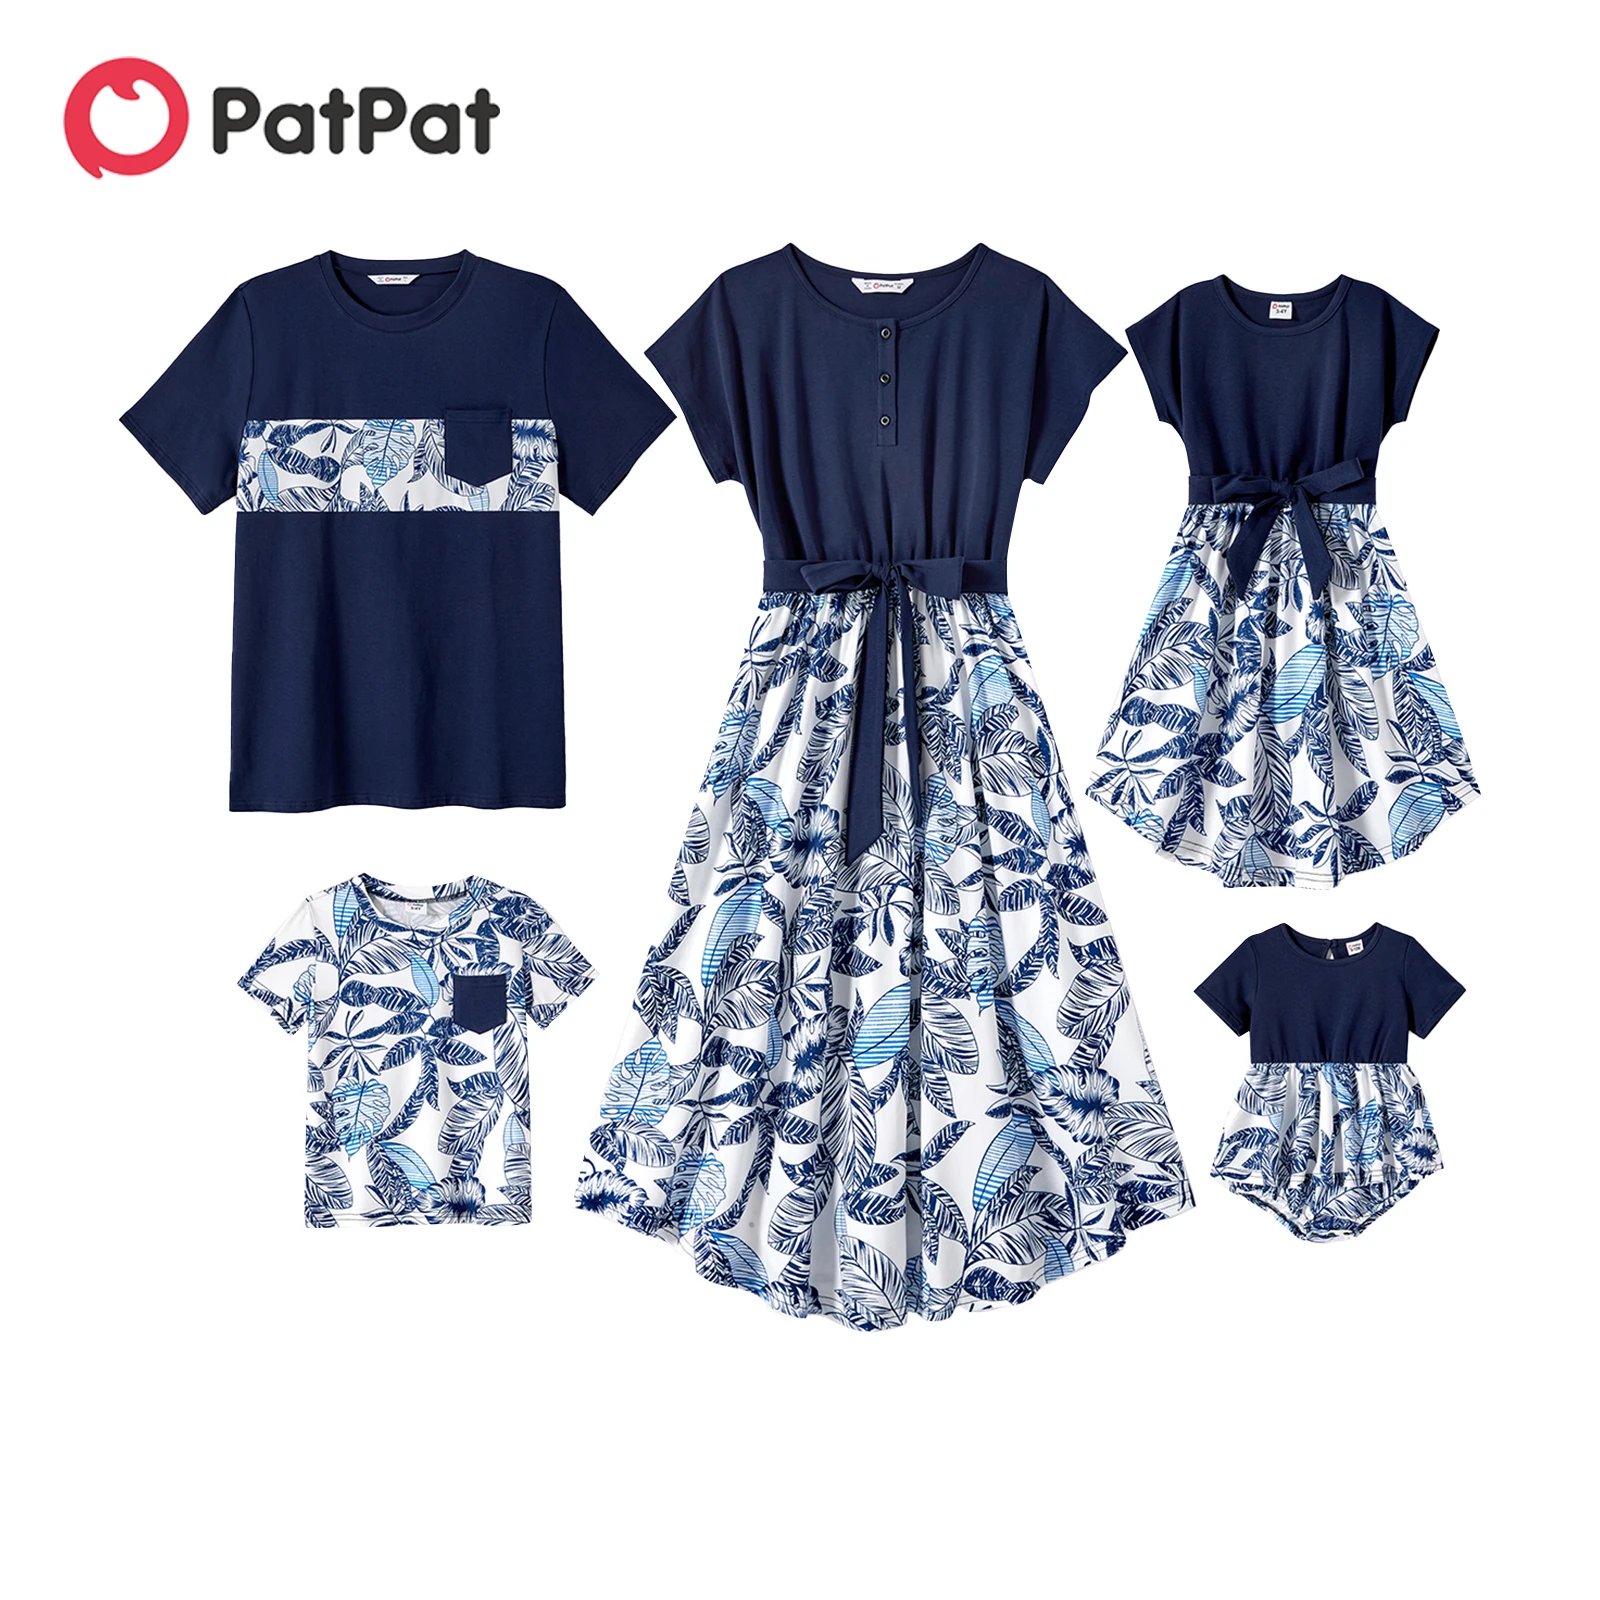 

PatPat Family Matching Outfits 95% Cotton Allover Plant Print Short-sleeve Belted Spliced Dresses and T-shirts Family Look Sets